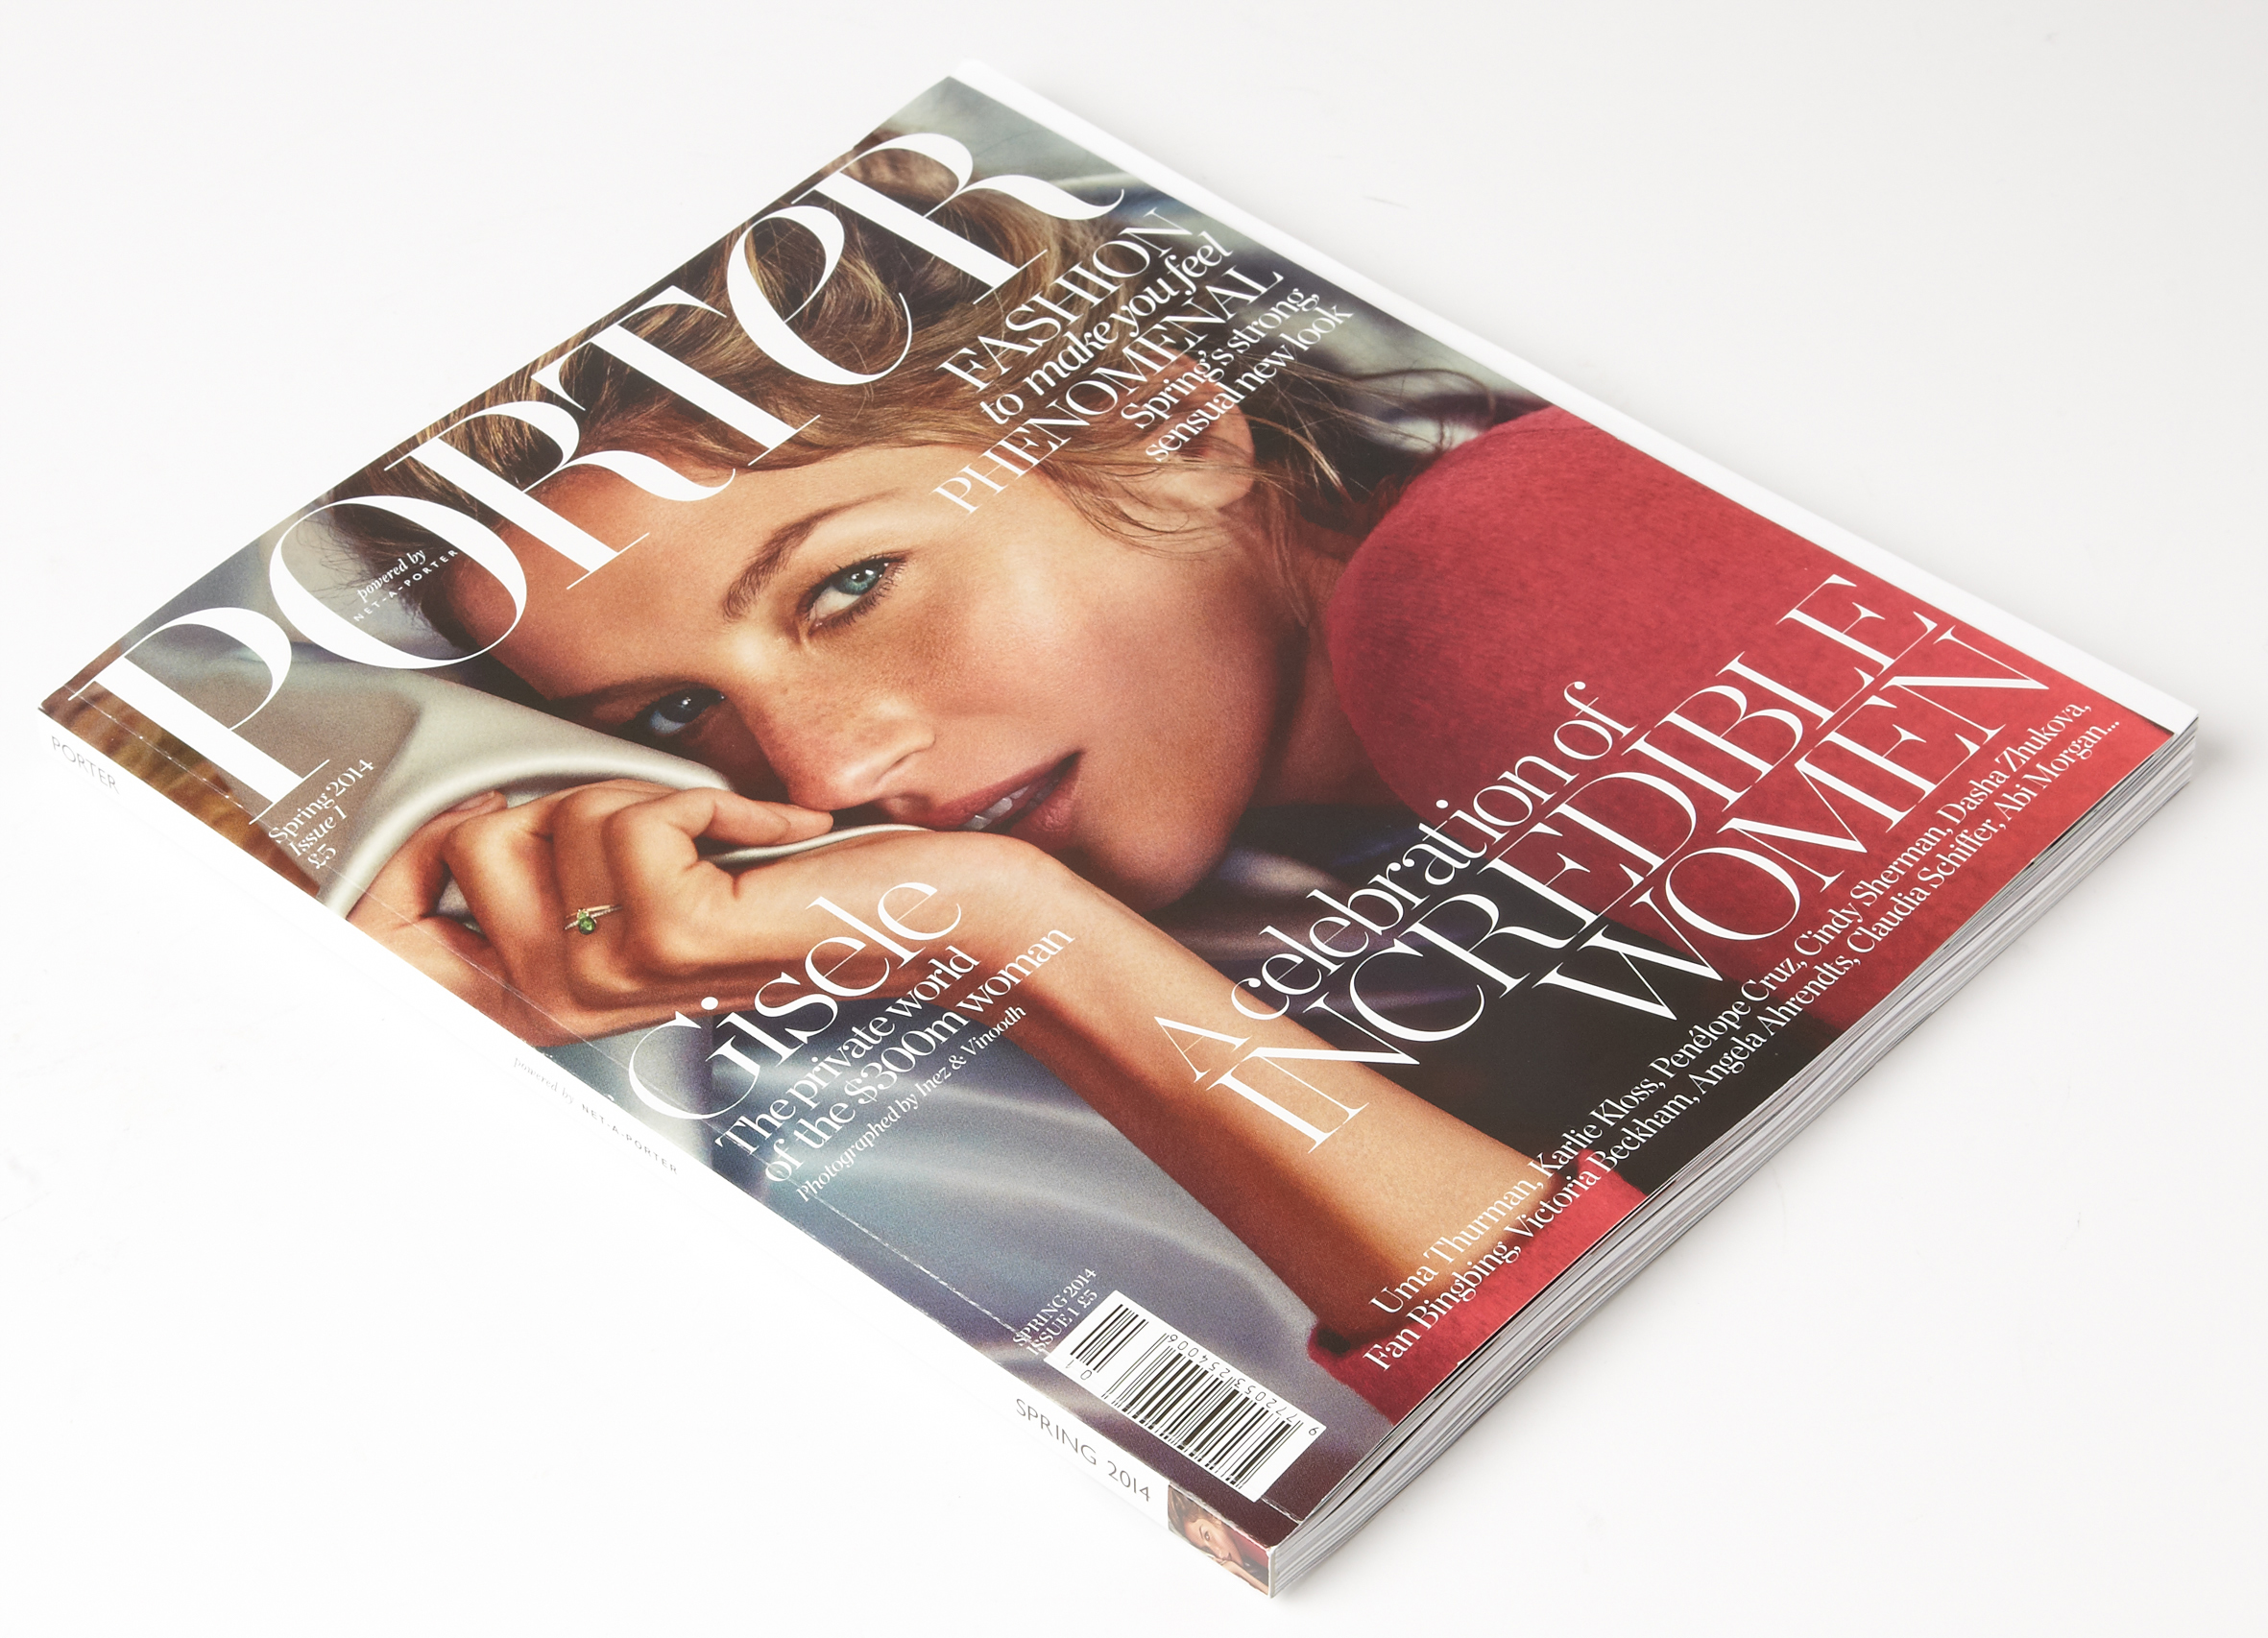 NET-A-PORTER Launches Shoppable Print Mag